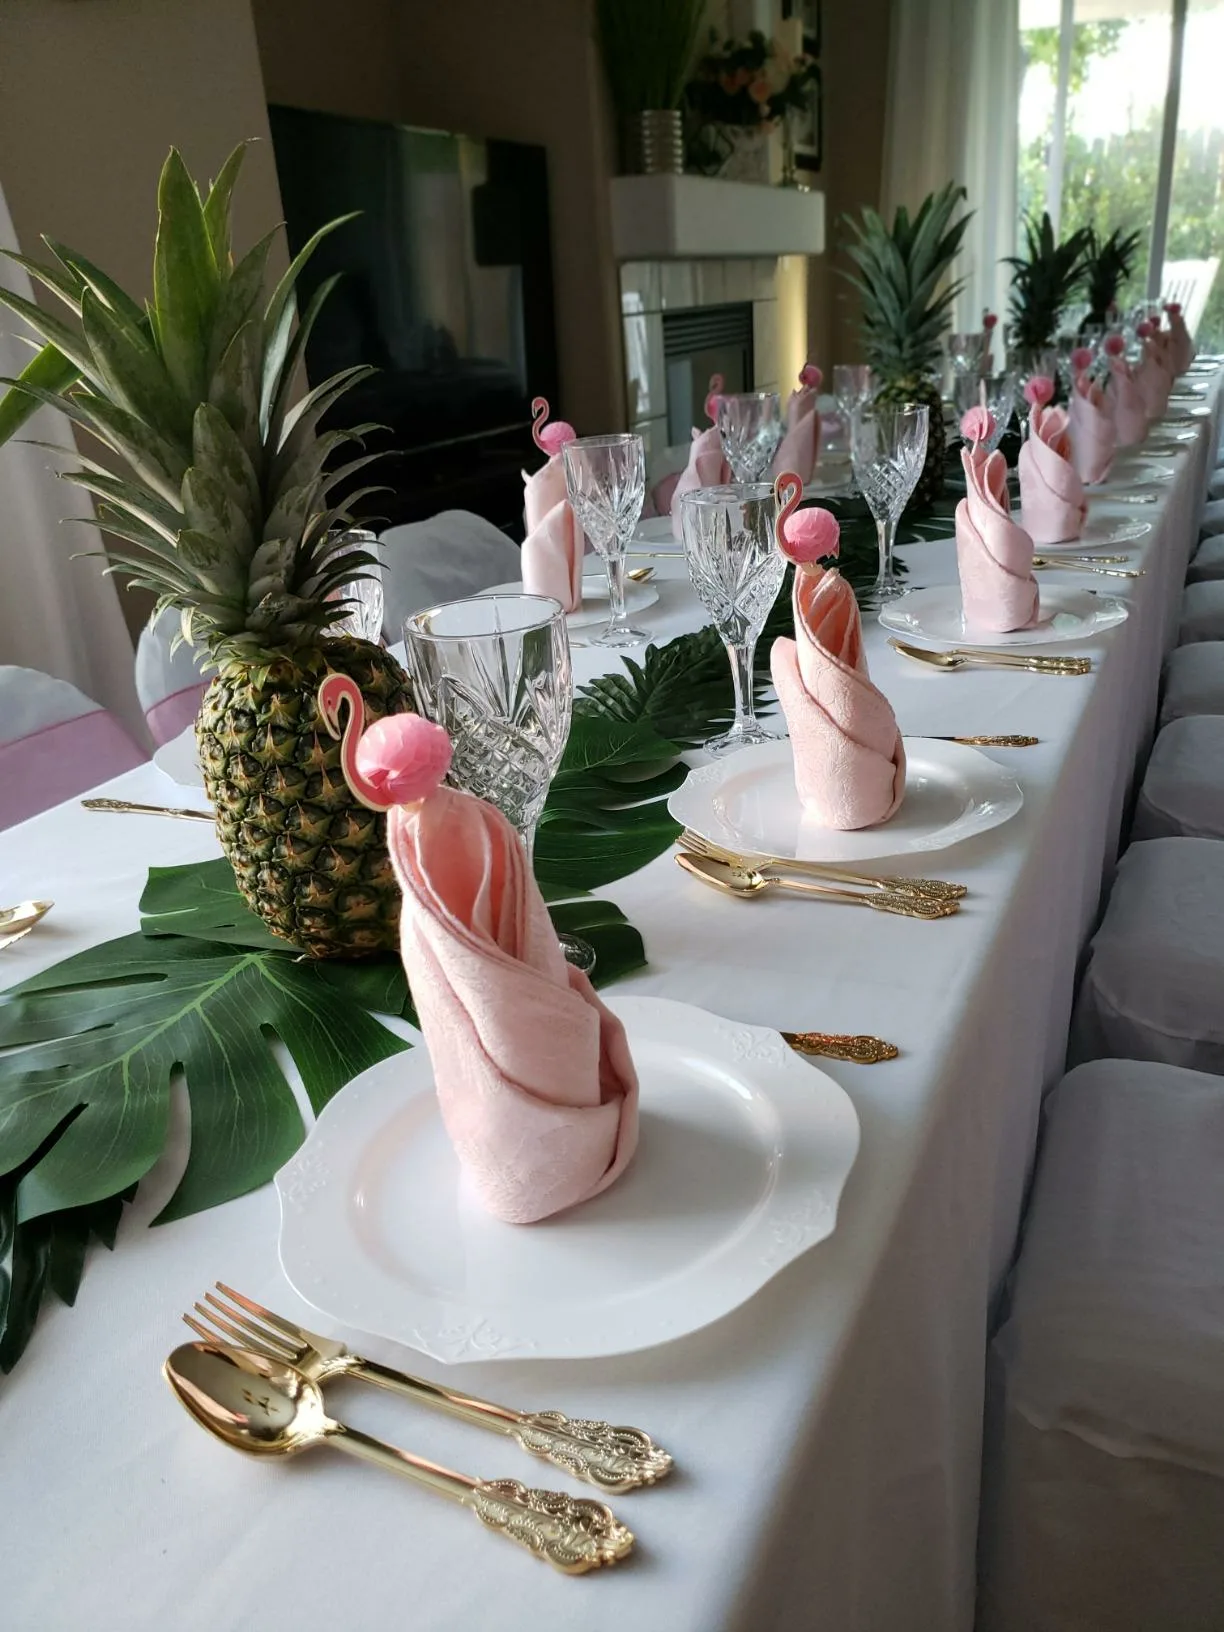 Green Placemats Centerpiece Pineapple Pink Napkins Flamingo Angle View Dinner Table Setting